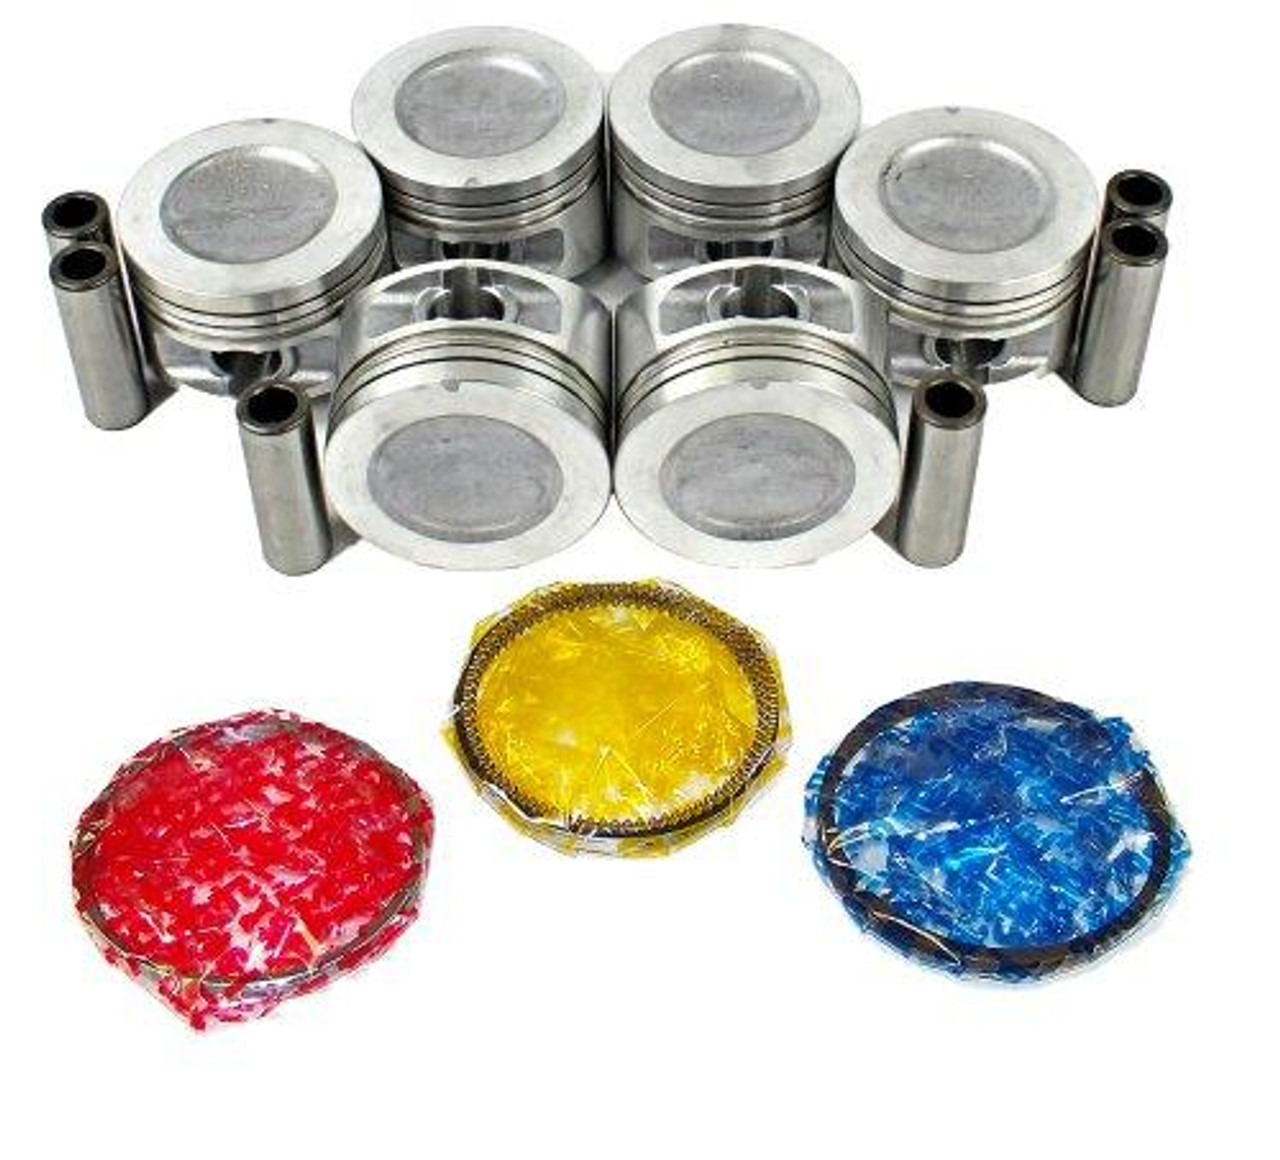 Piston Set with Rings - 1989 Ford Ranger 2.9L Engine Parts # PRK421ZE17